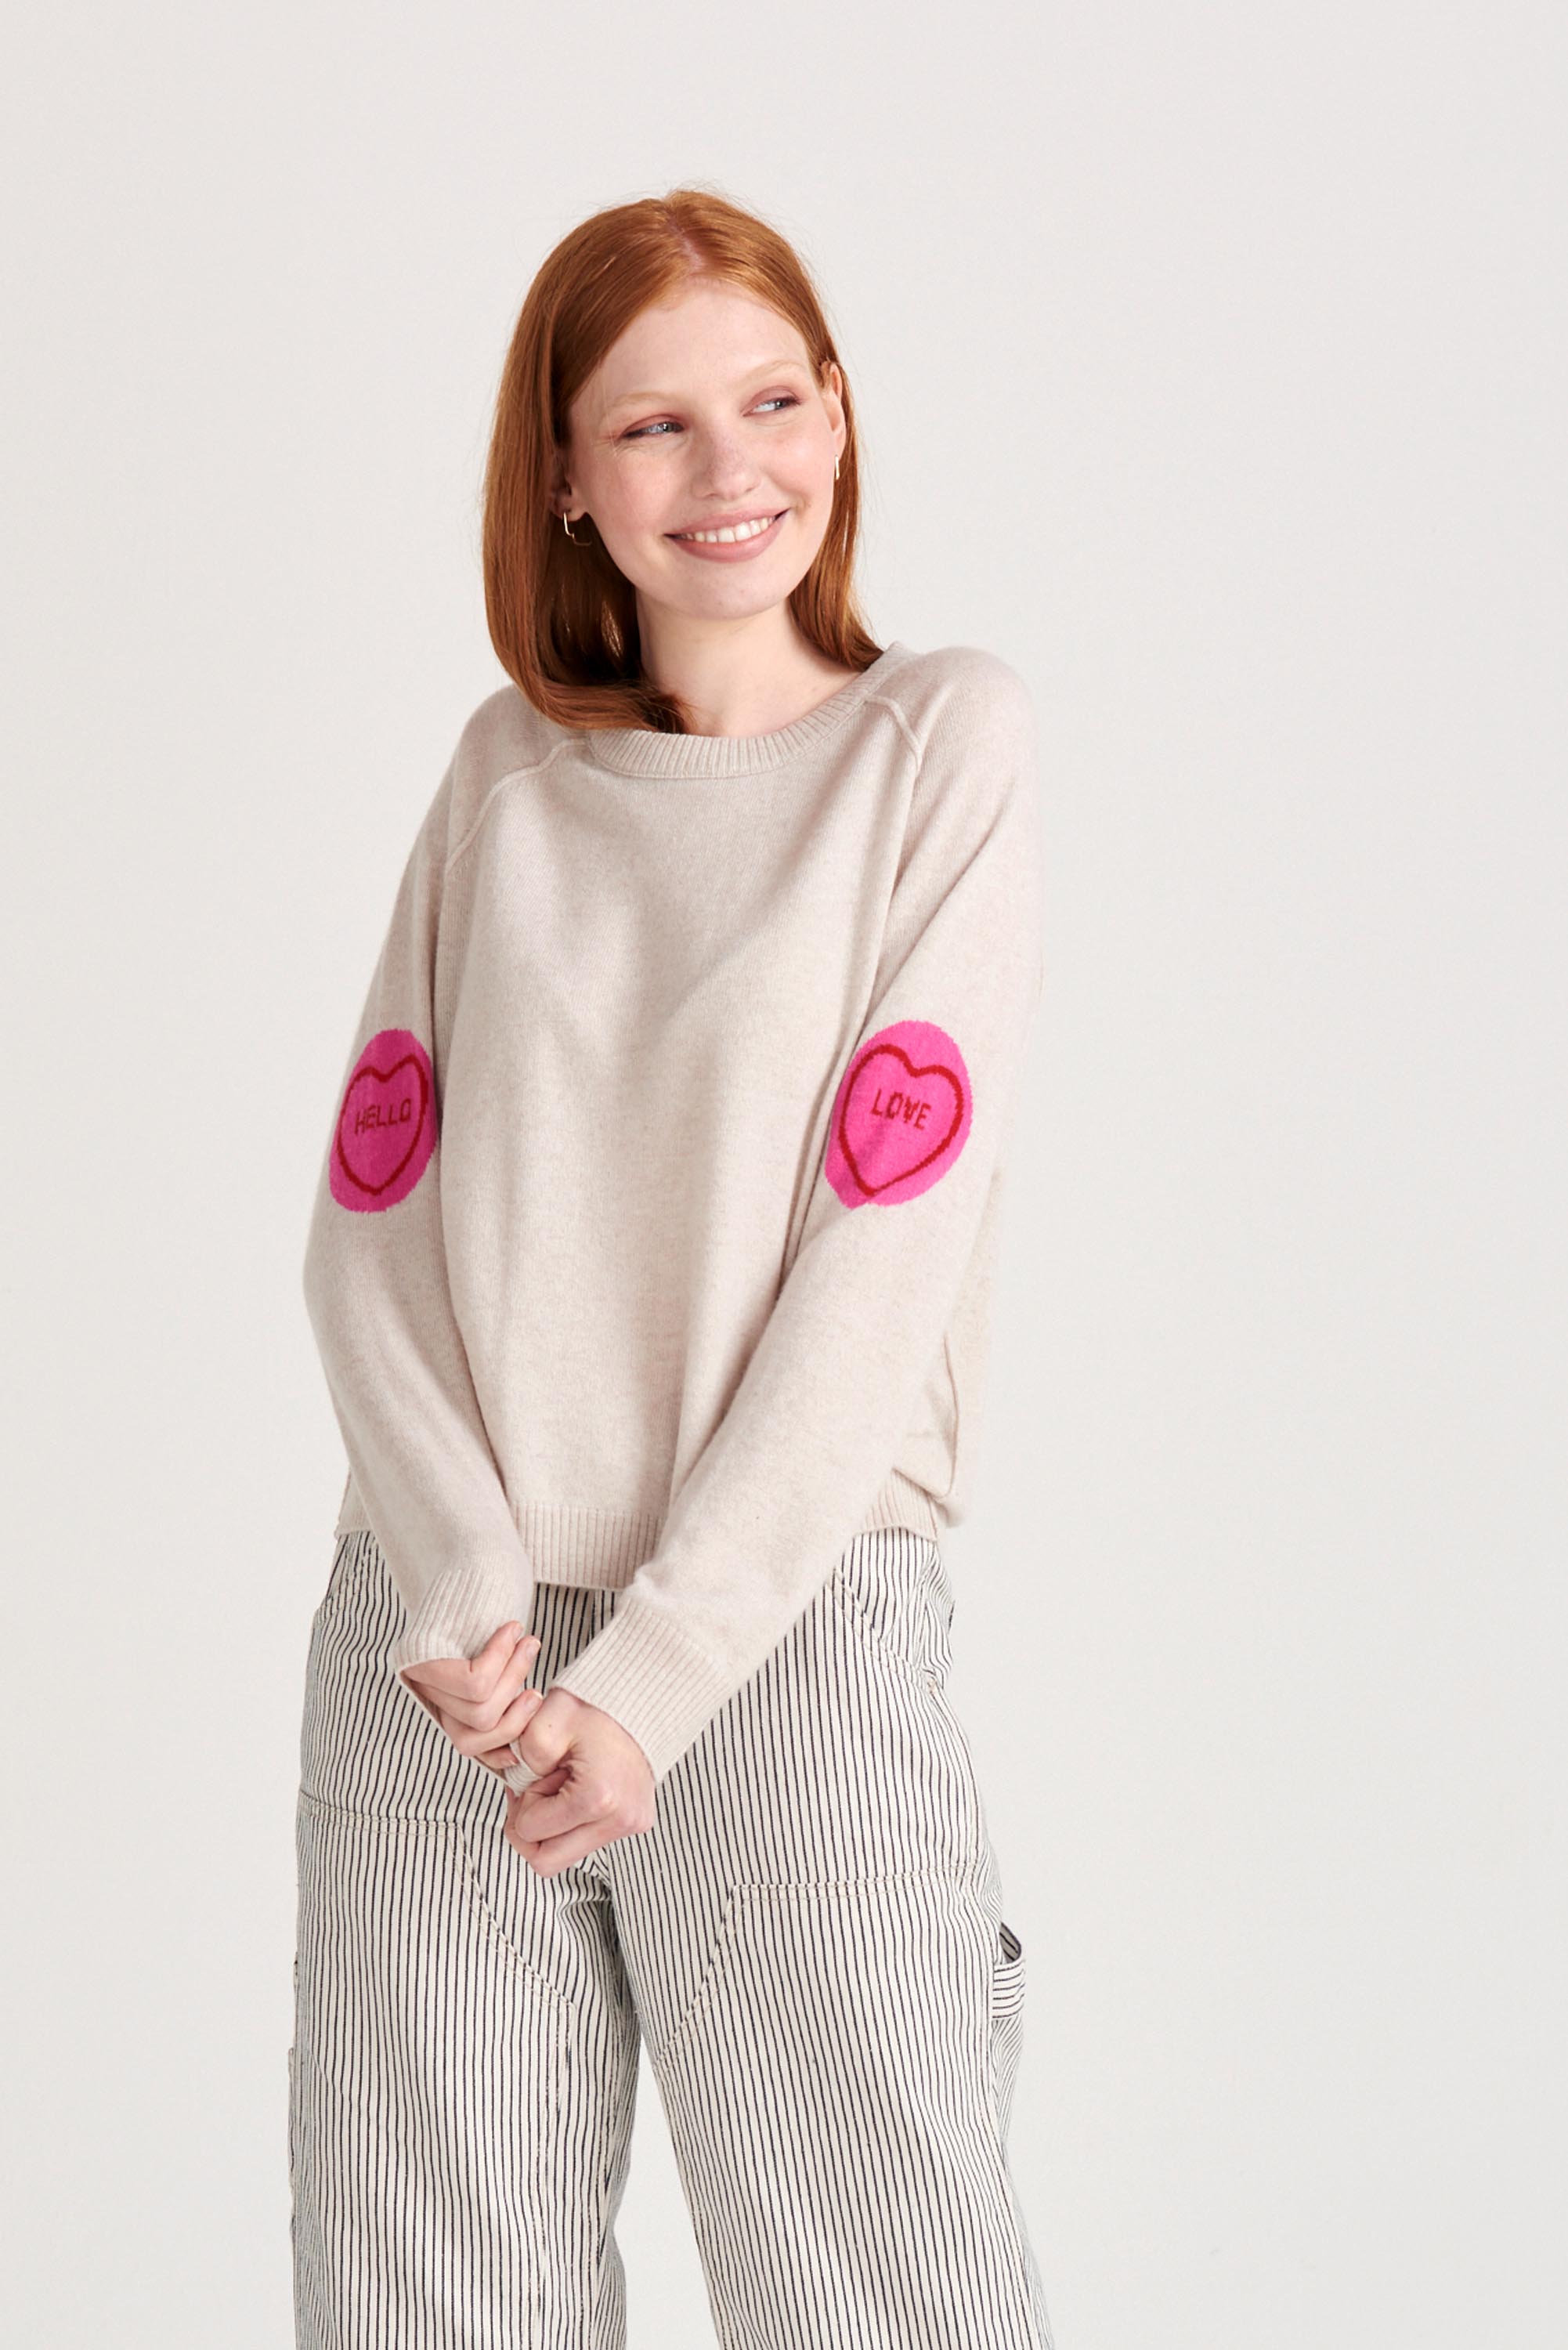 Red haired model wearing Jumper1234 Oatmeal cashmere and wool mix crew neck sweatshirt style jumper with all over pink and red love hearts intarsia on the sleeves